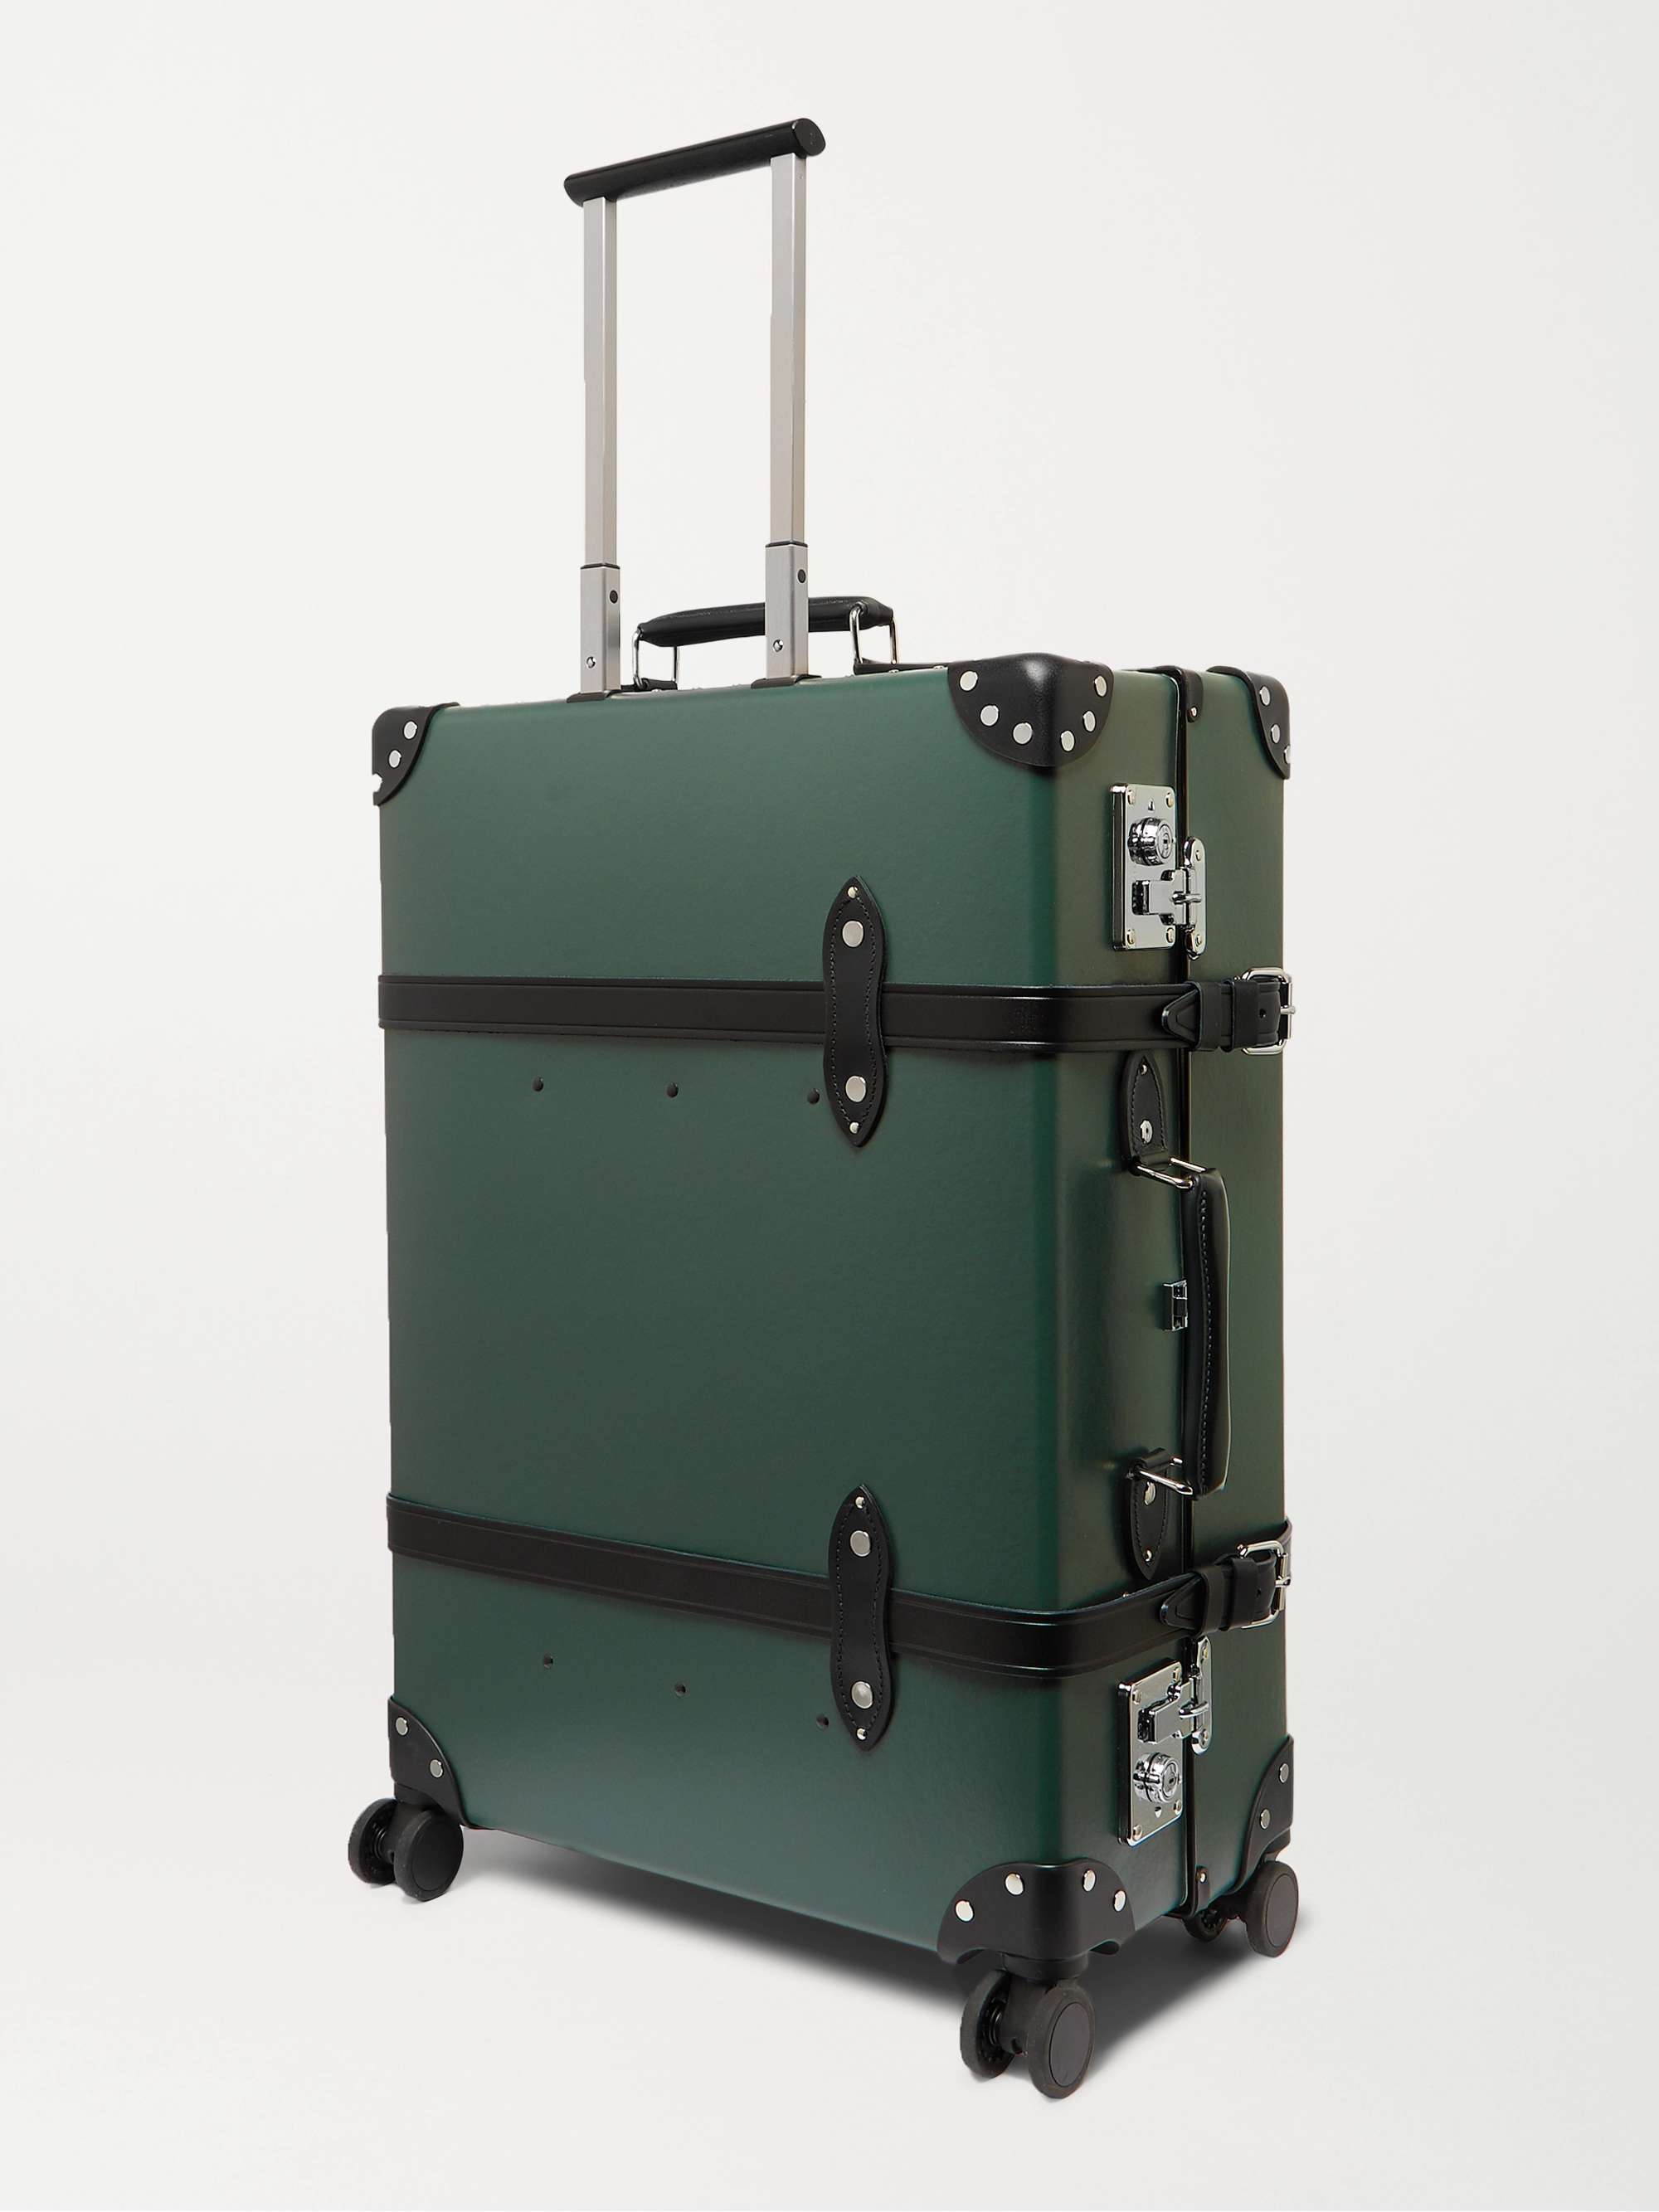 GLOBE-TROTTER + No Time to Die 30" Leather-Trimmed Trolley Case